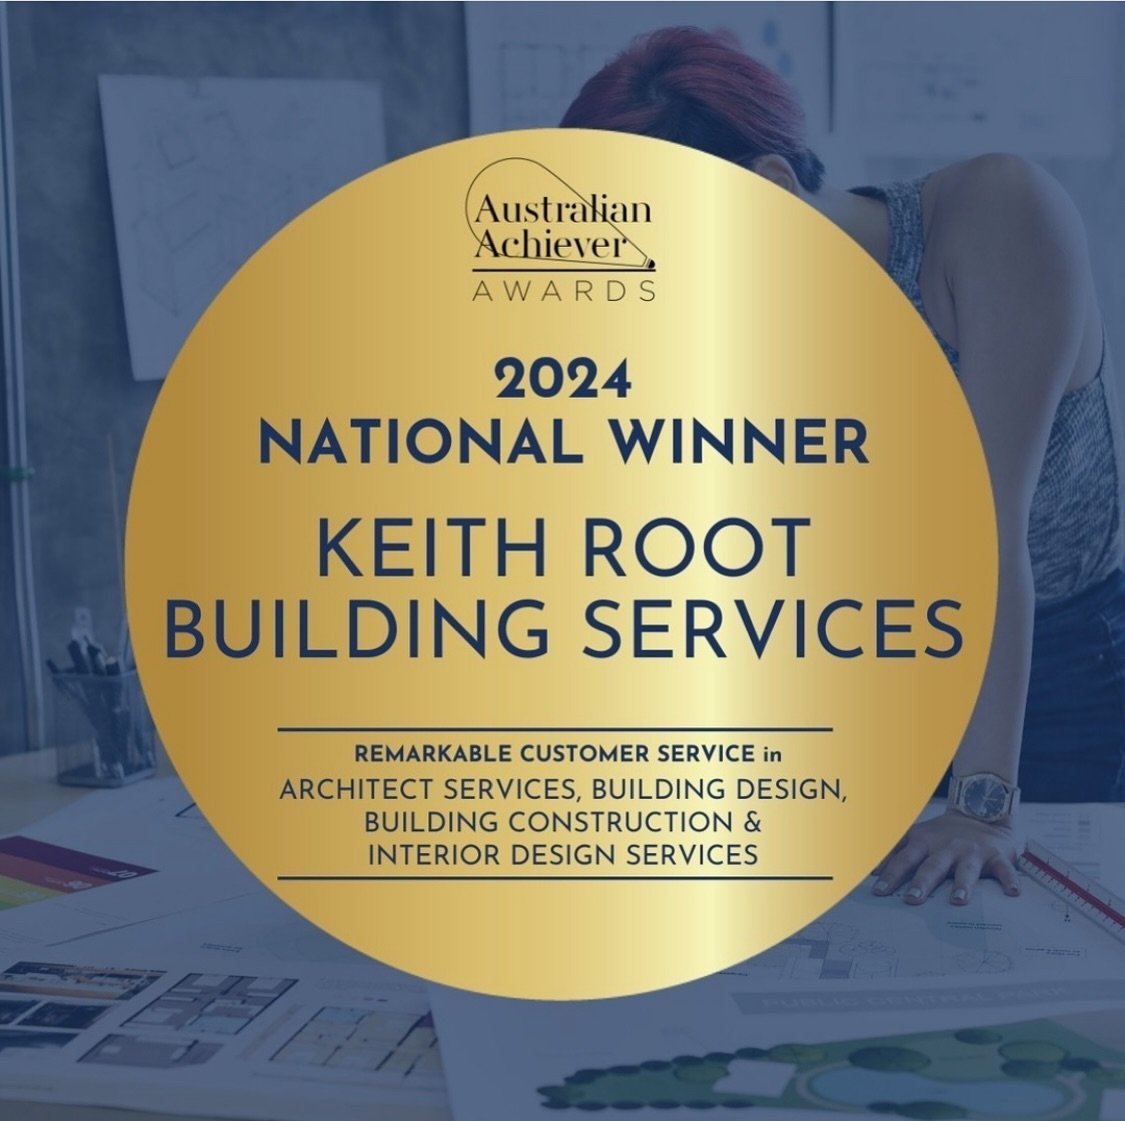 We are humbled and honored to be announced as the national winner of the 2024 @australian.achiever.awards for Architect services, Building Design, Building Construction &amp; Interior  Design Services &hellip; ⭐️ 🎉

These awards recognize exceptiona